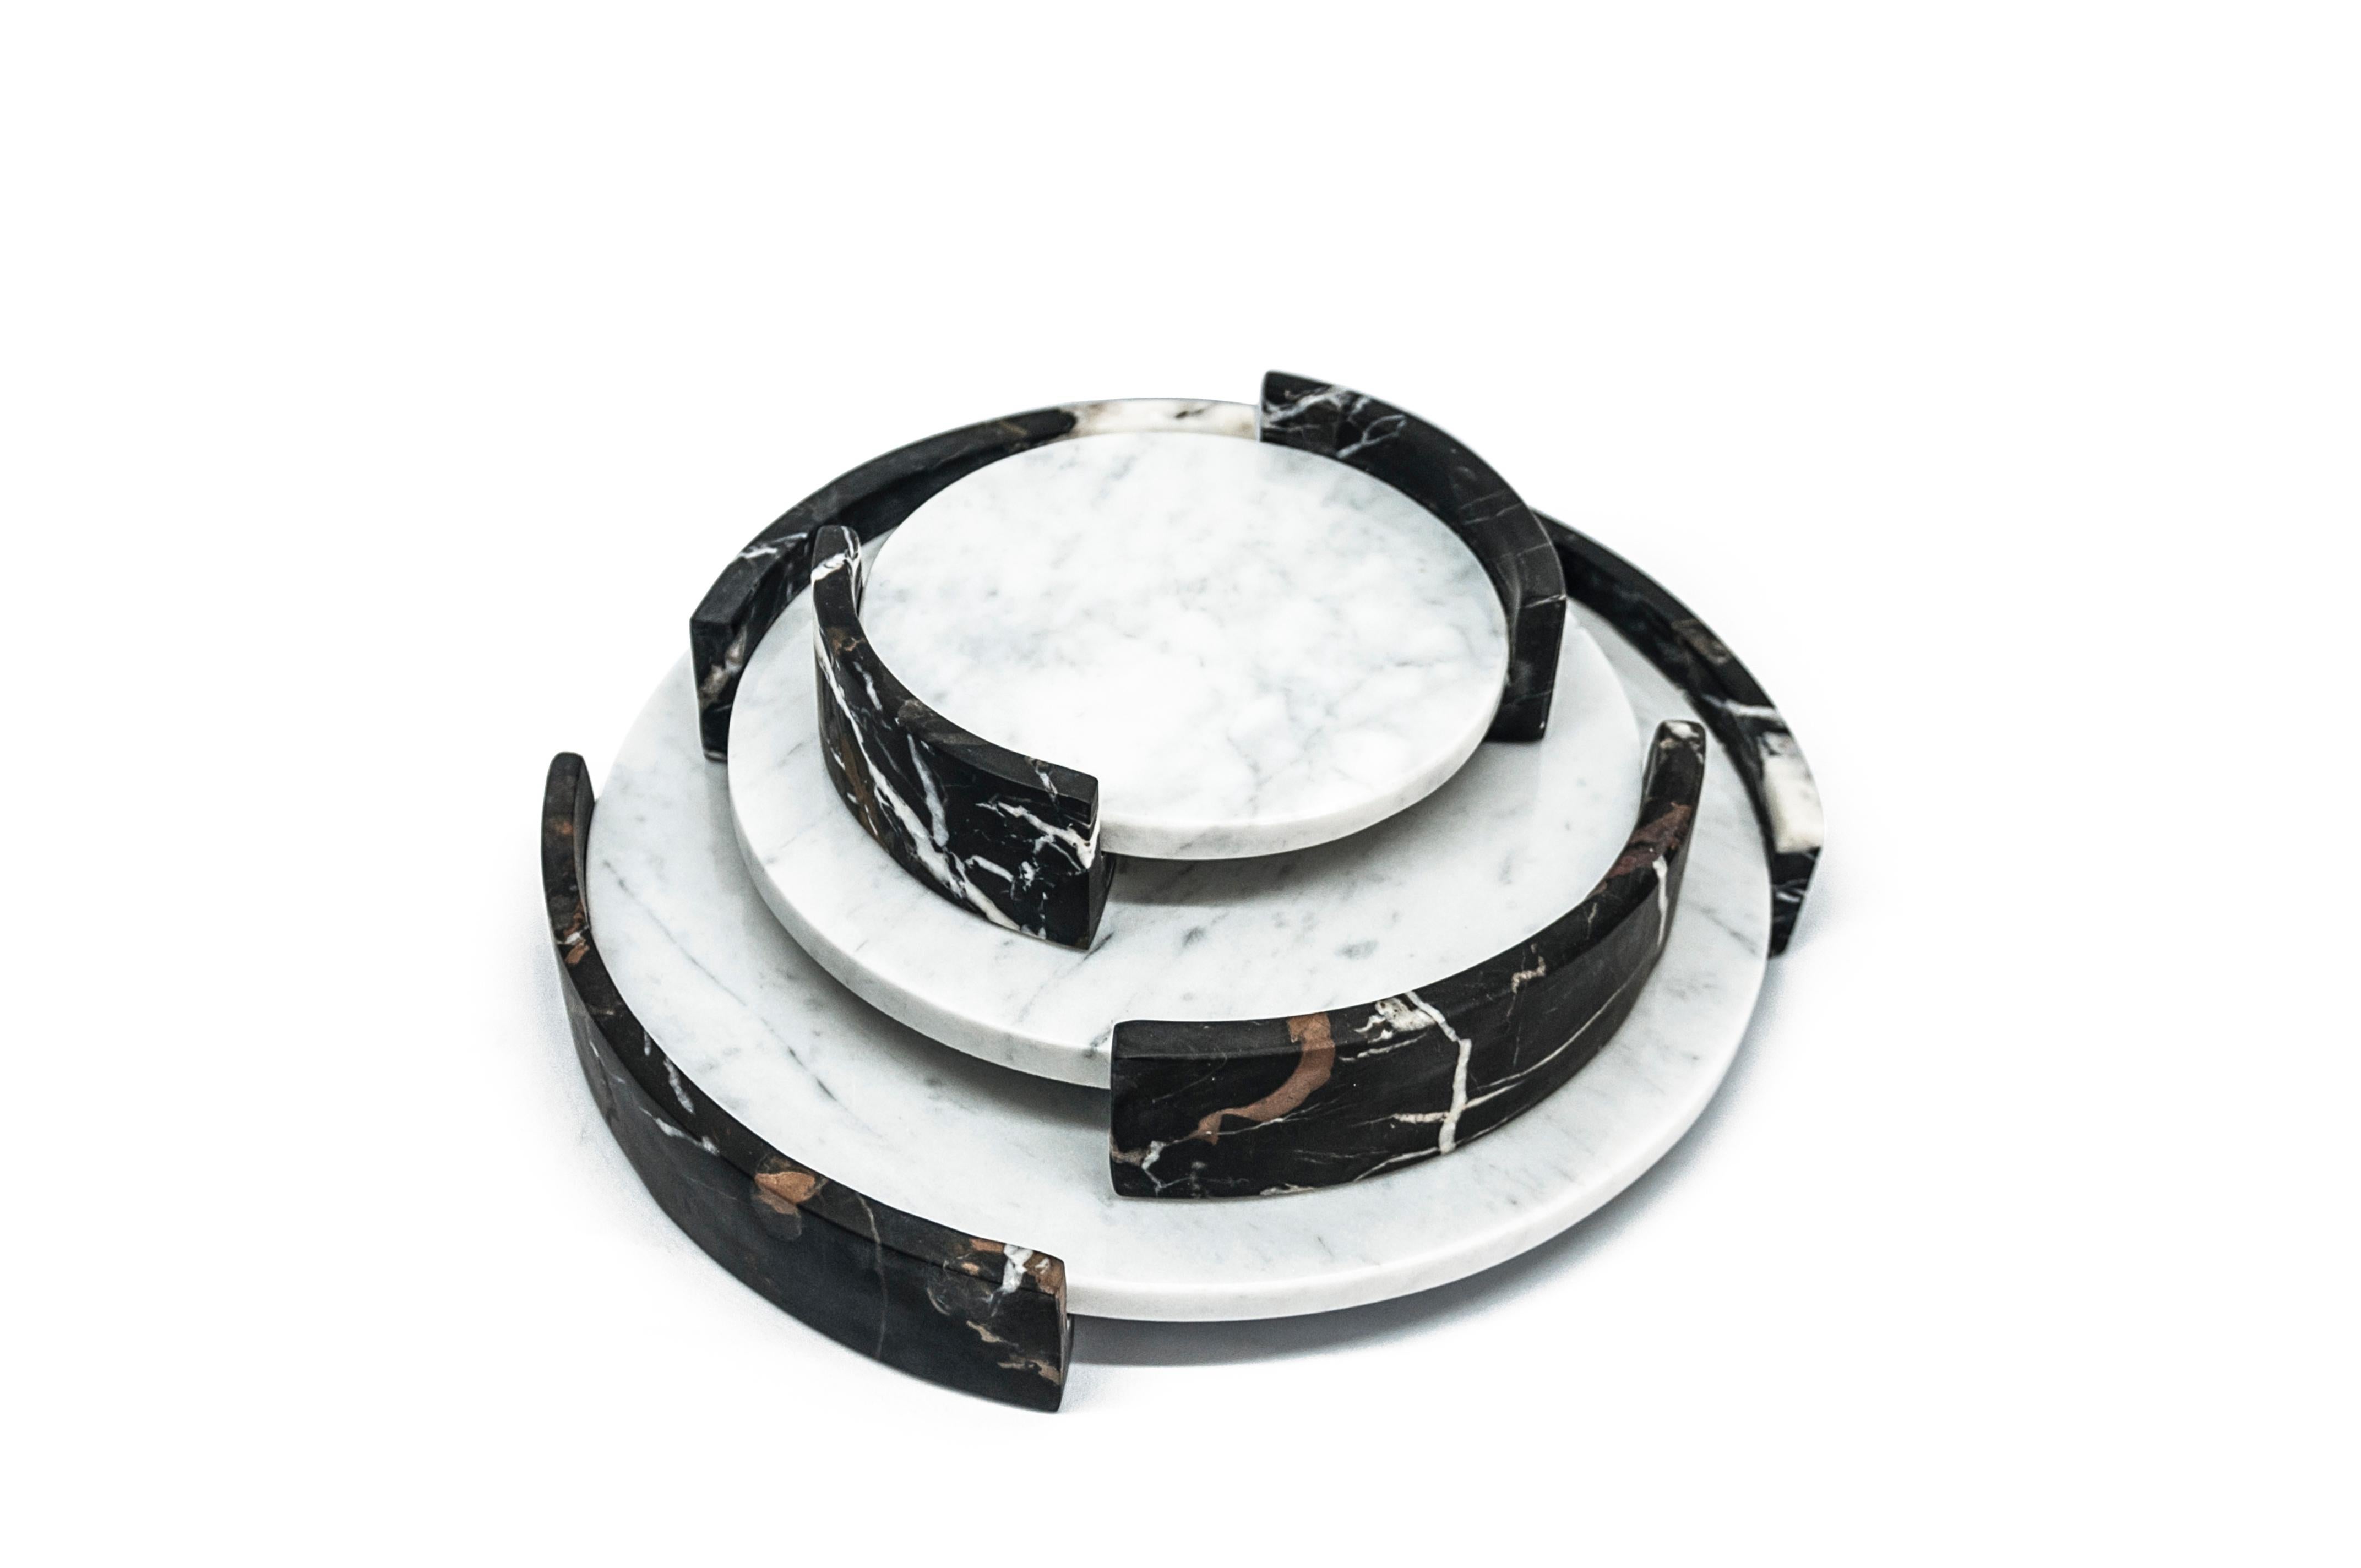 Big circular triptych tray with handles in white Carrara and black Marquina marble.
-Jacopo Simonetti design for FiammettaV-
Each piece is in a way unique (every marble block is different in veins and shades) and handmade by Italian artisans